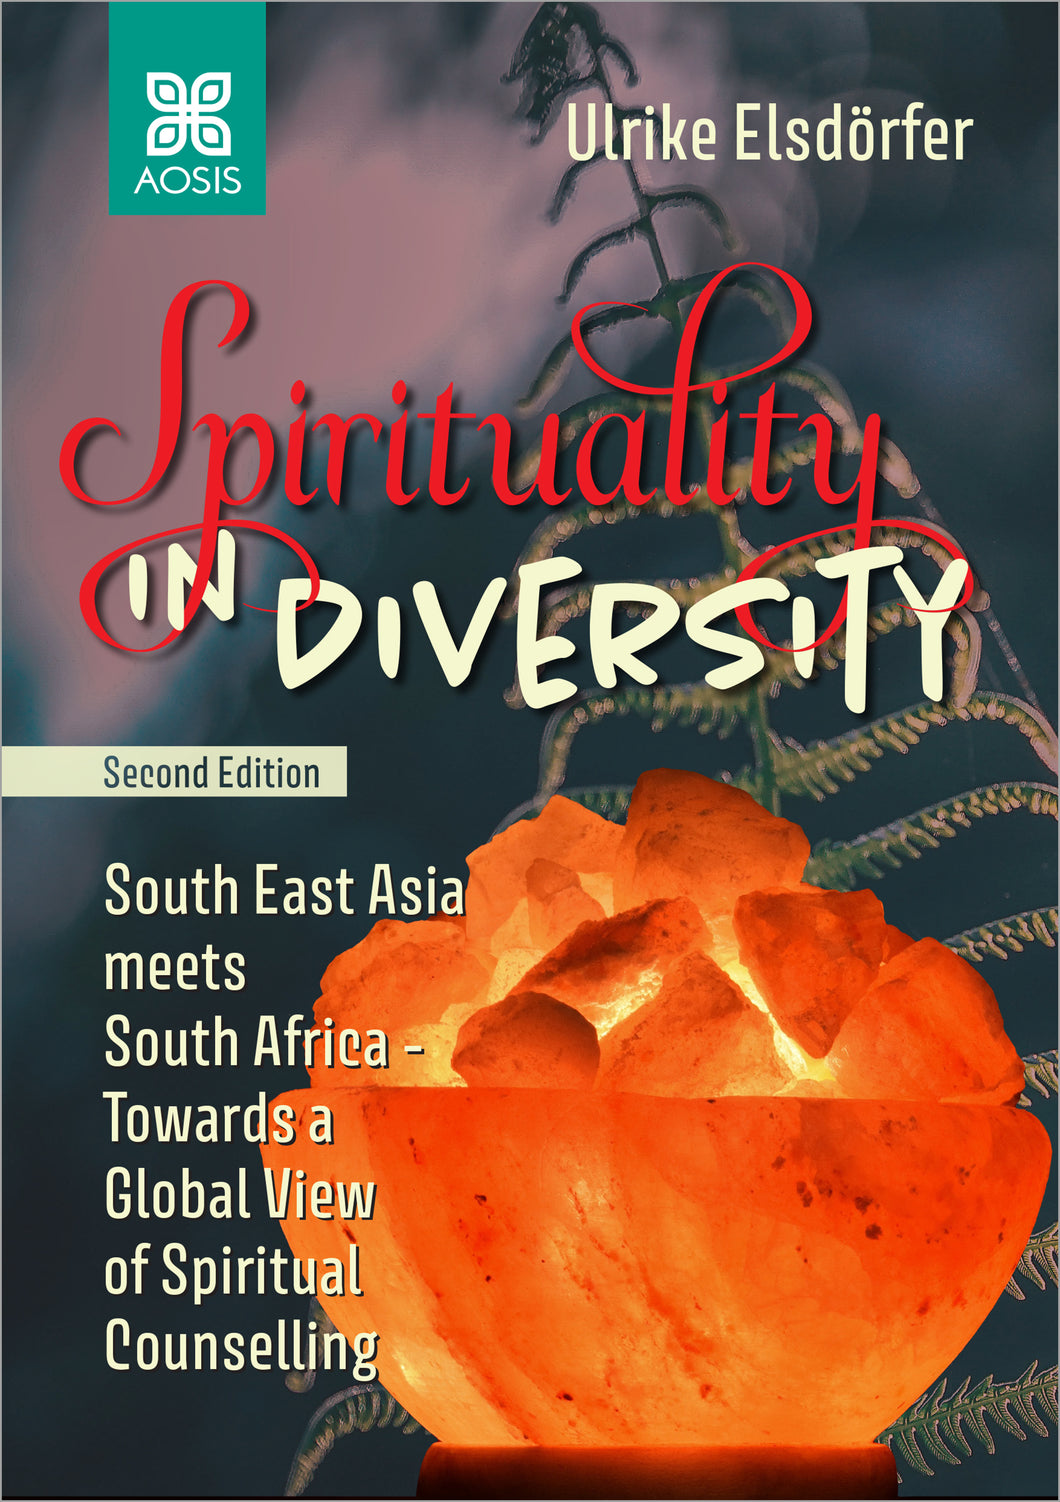 Spirituality in Diversity: South East Asia Meets South Africa - Towards a Global View of Spiritual Counselling (Hardcover - Collectors Item)